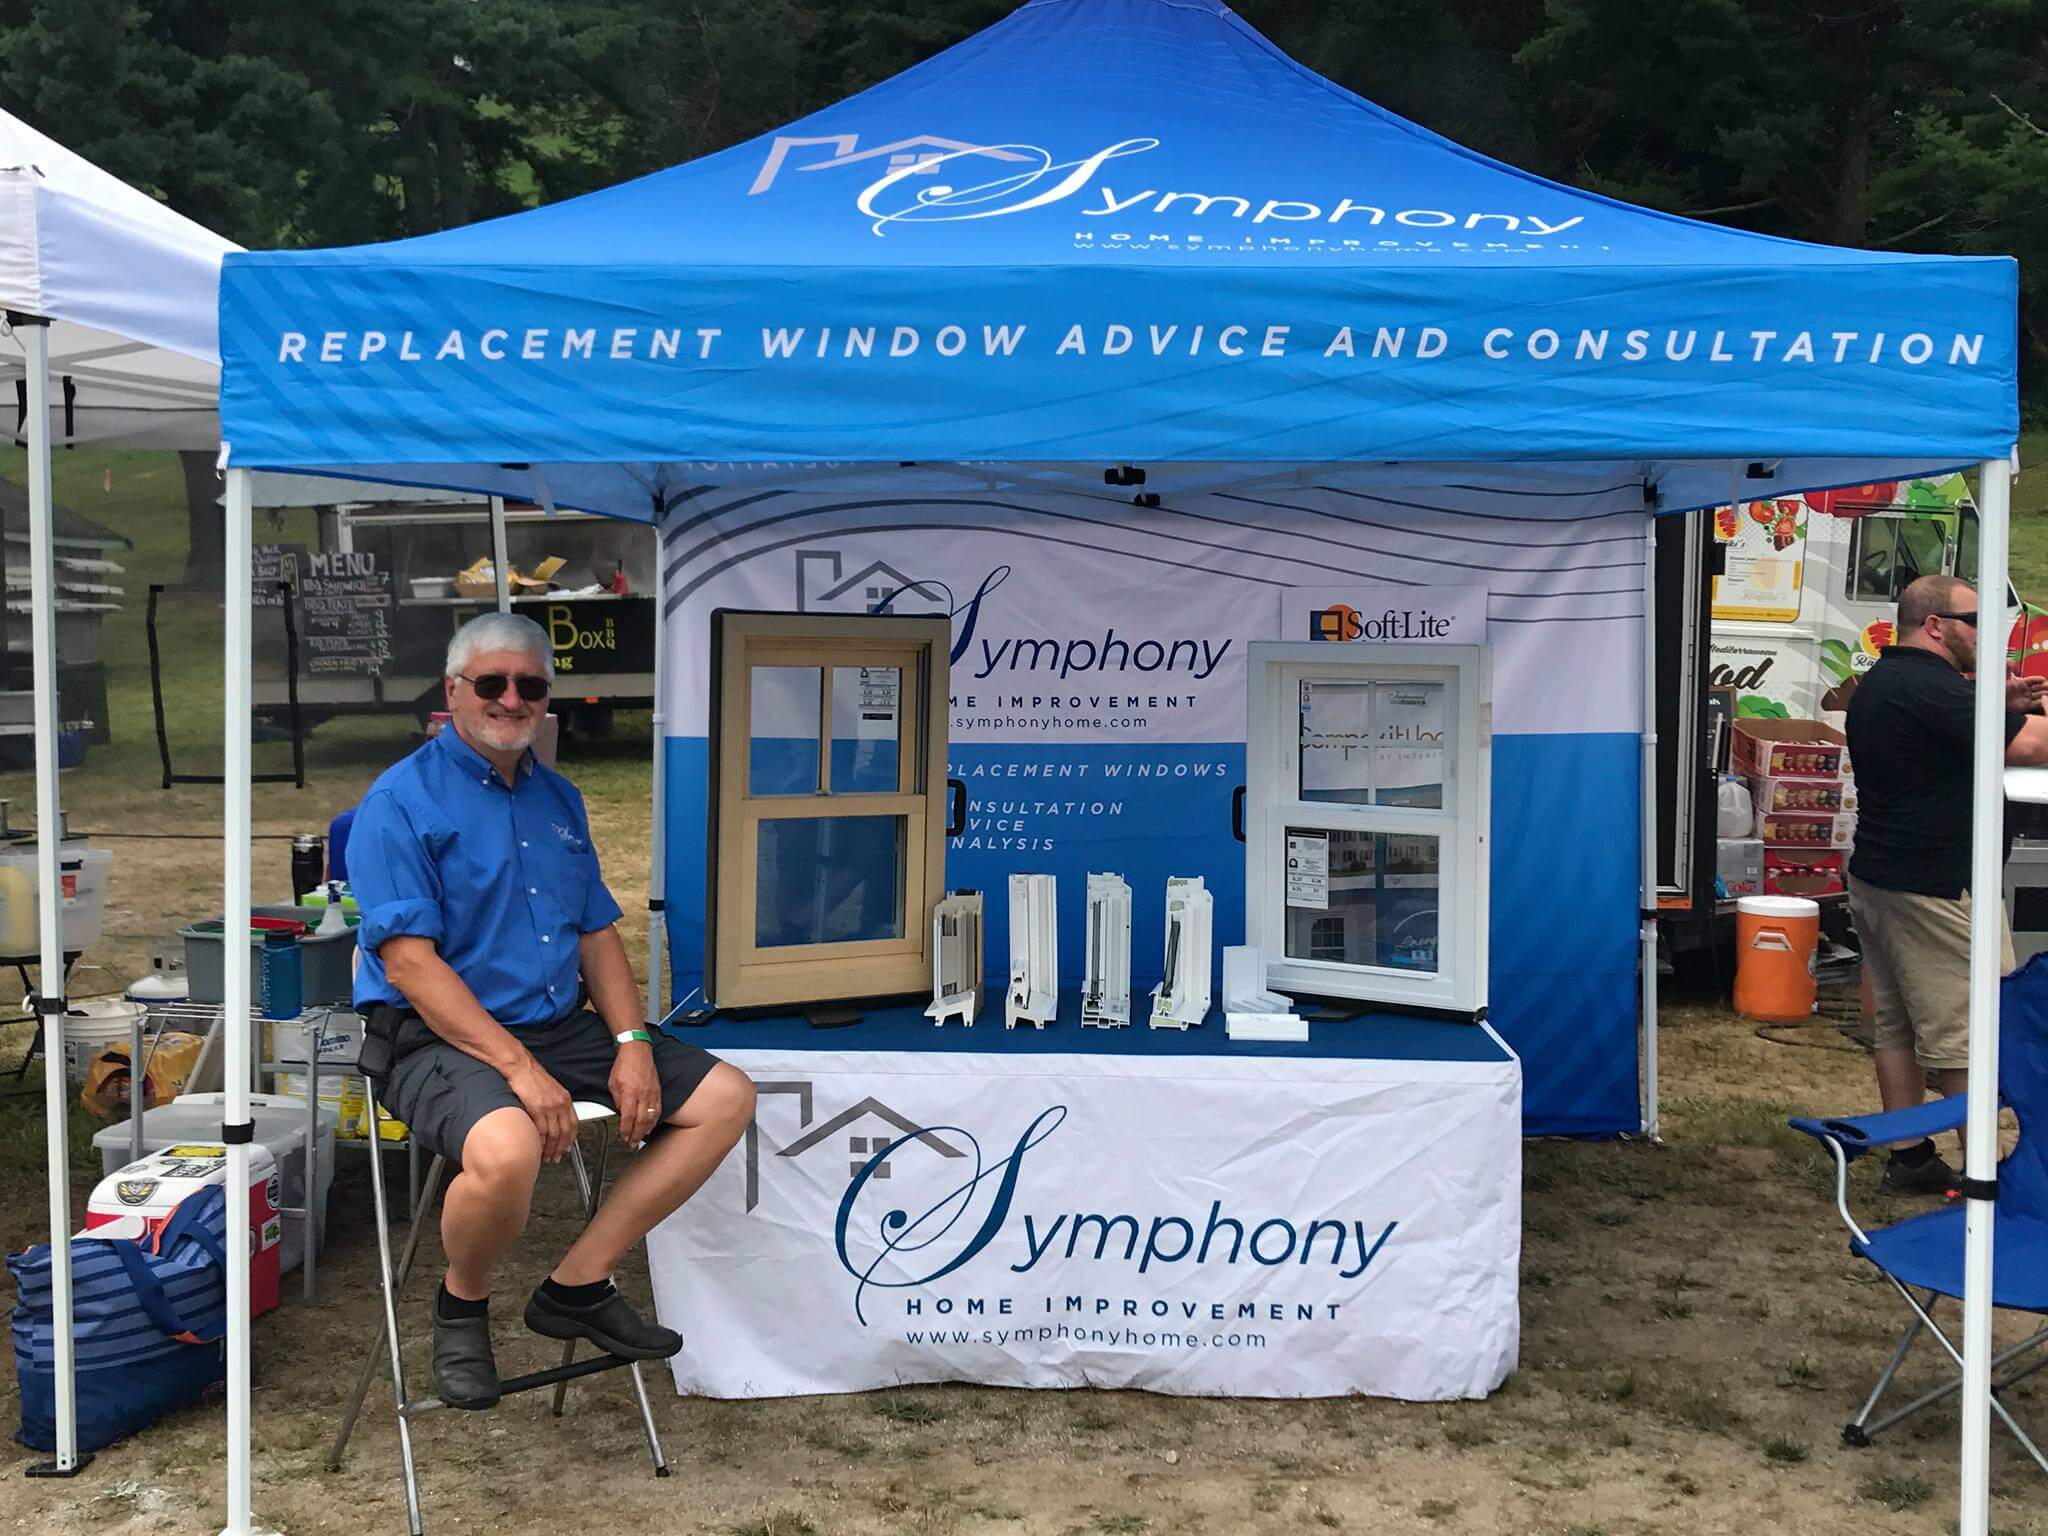 symphony home improvement's outdoor vendor setup with tactile product displays and an engaging representative